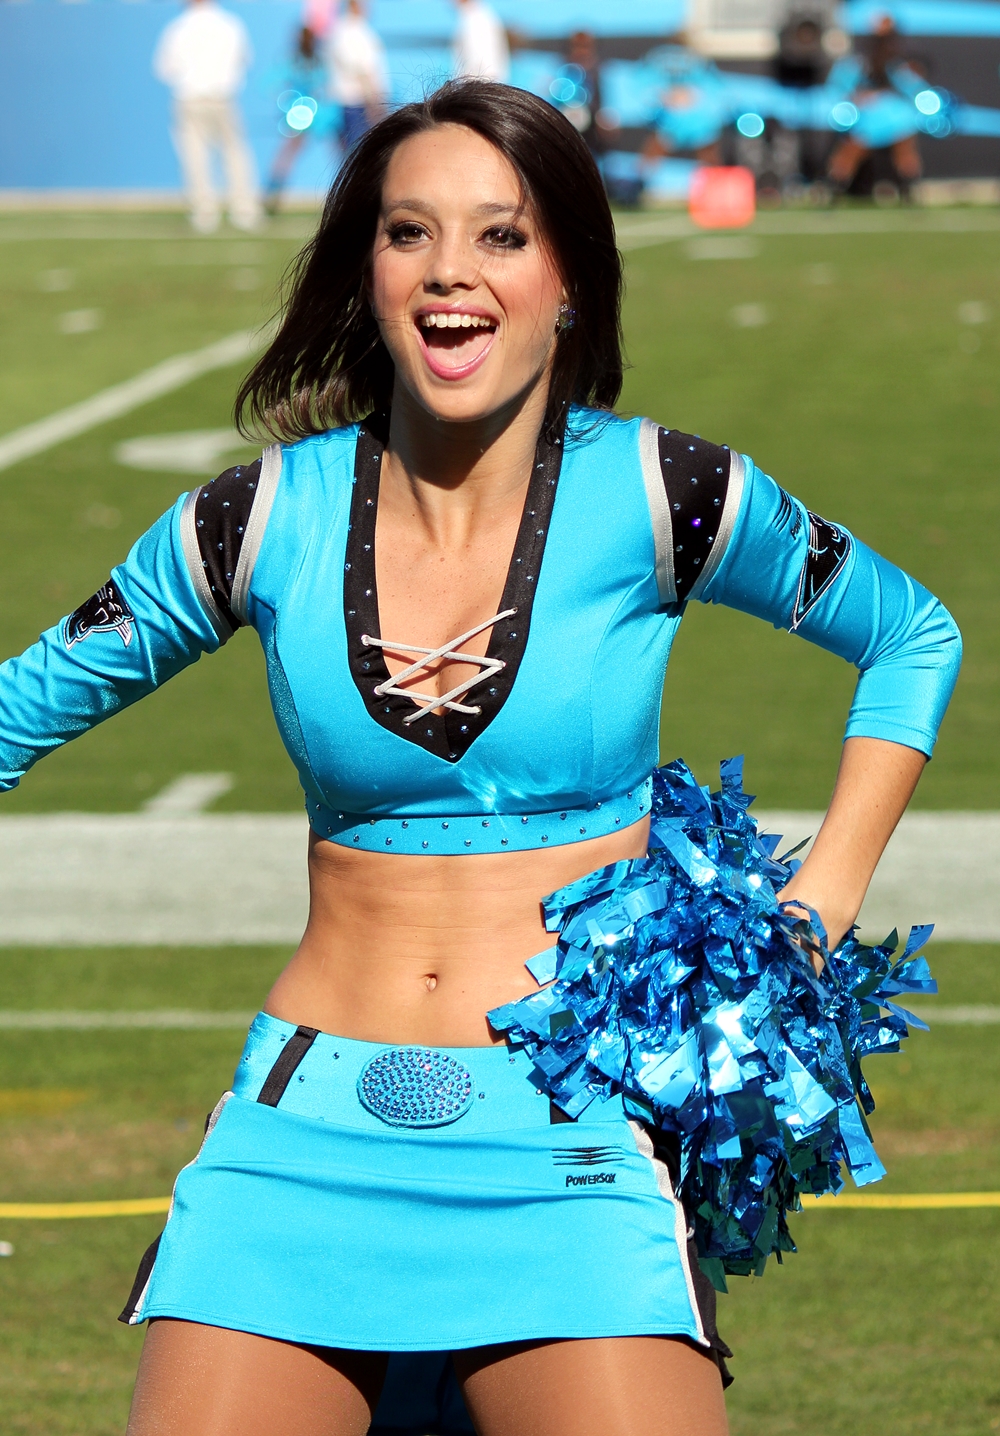 Another Super Rookie in Charlotte, TopCat Laura B.